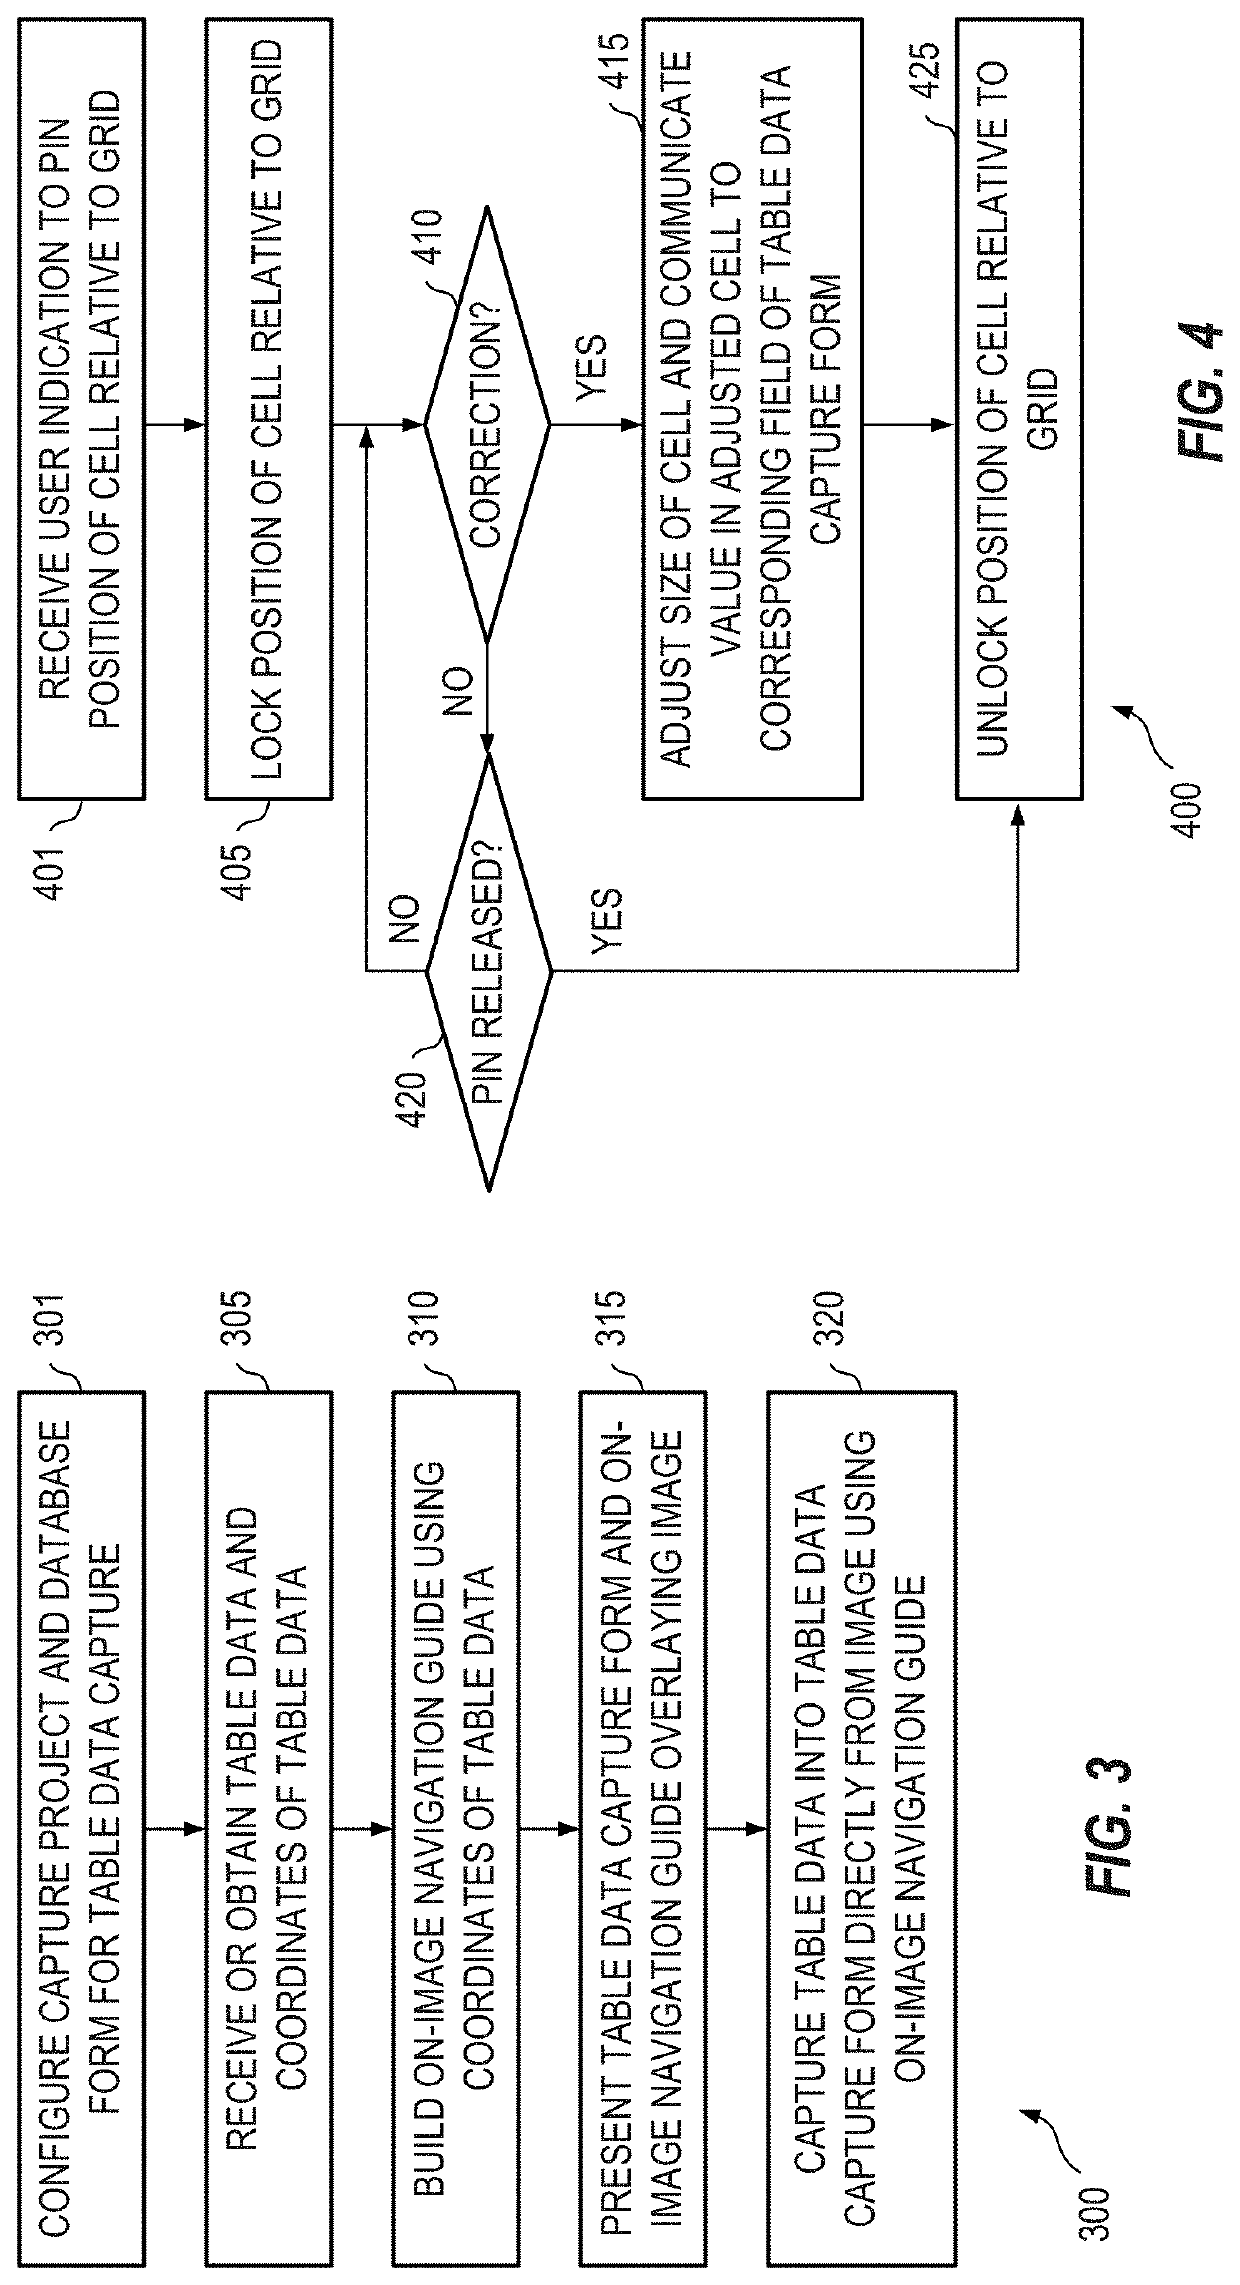 Systems and methods for on-image navigation and direct image-to-data storage table data capture